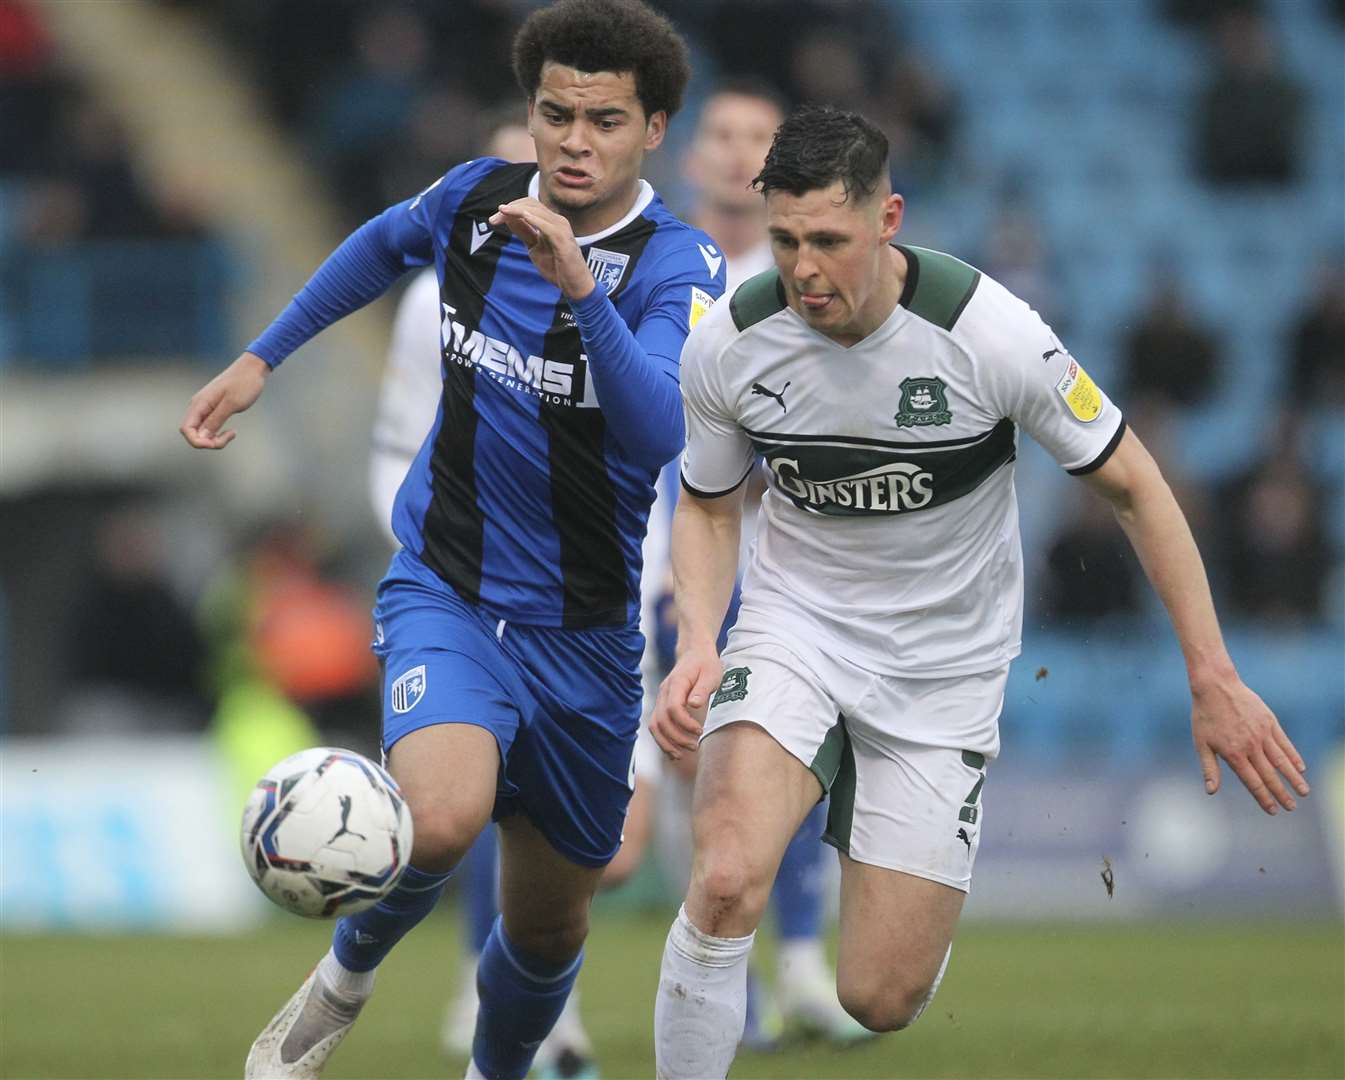 Gillingham's Tom Dickson-Peters challenges for the ball against Plymouth. Picture: KPI